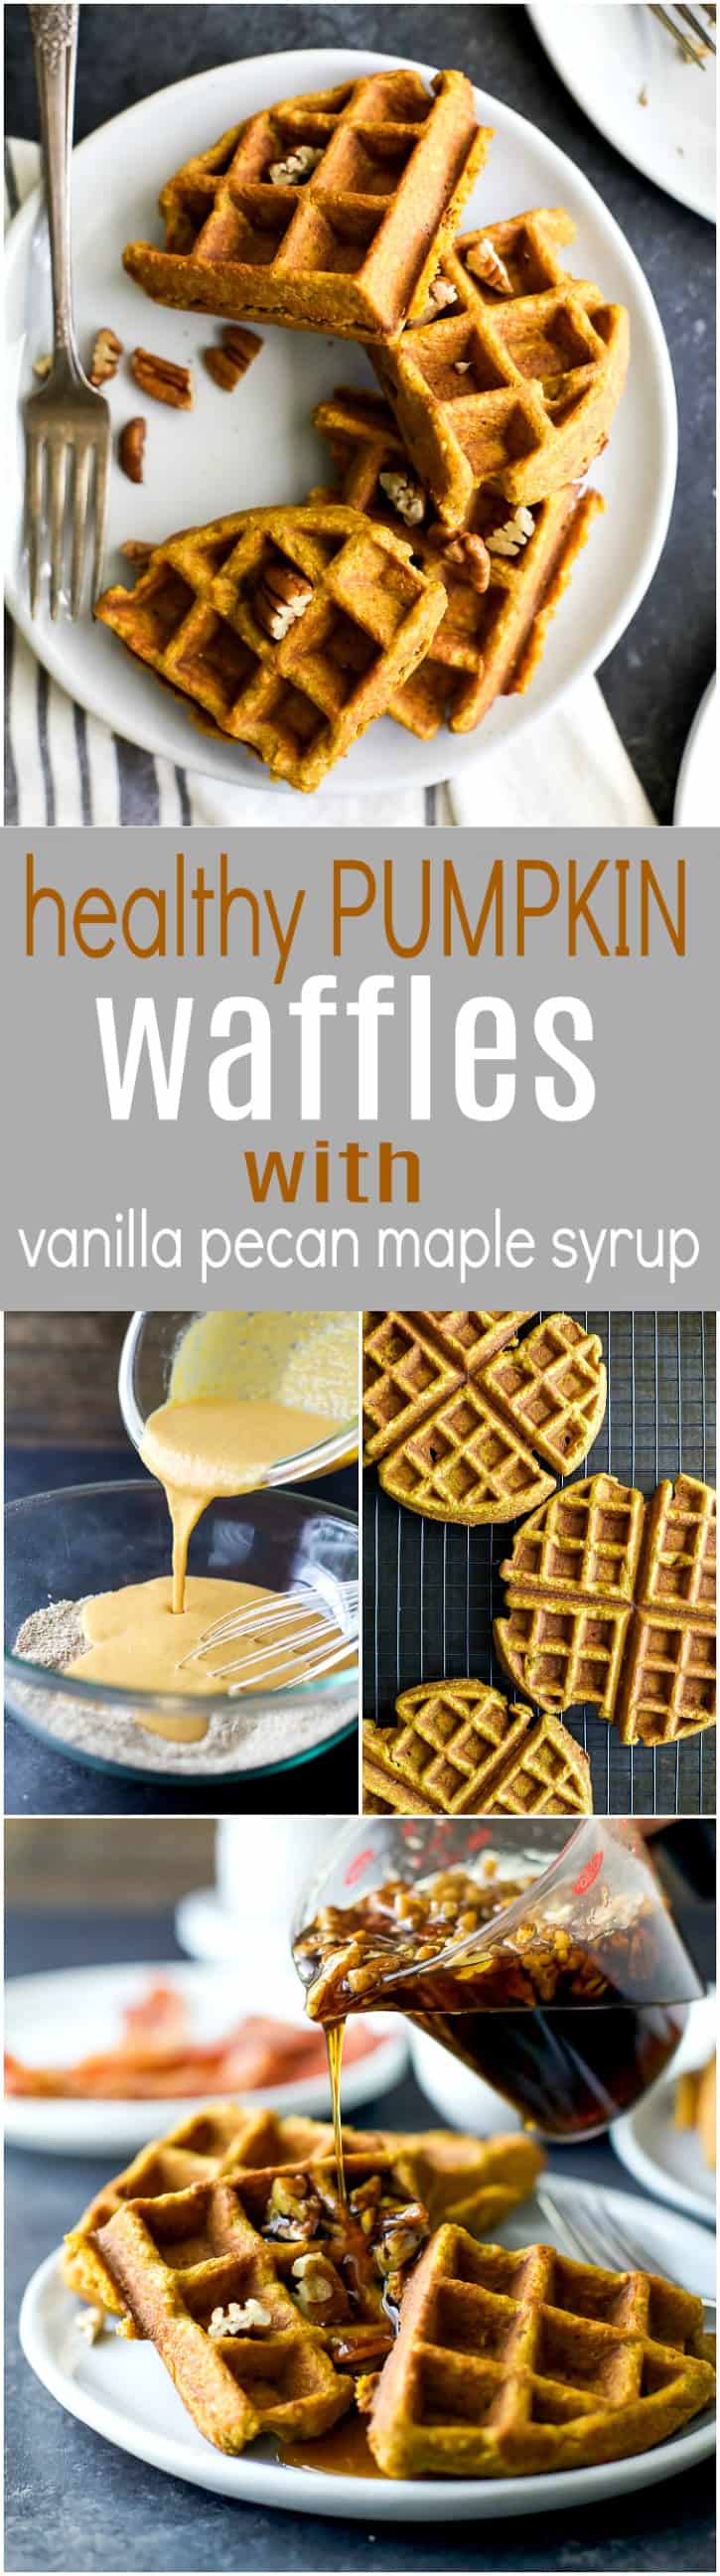 A collage of four images of gluten-free pumpkin waffles, waffle batter and vanilla pecan syrup